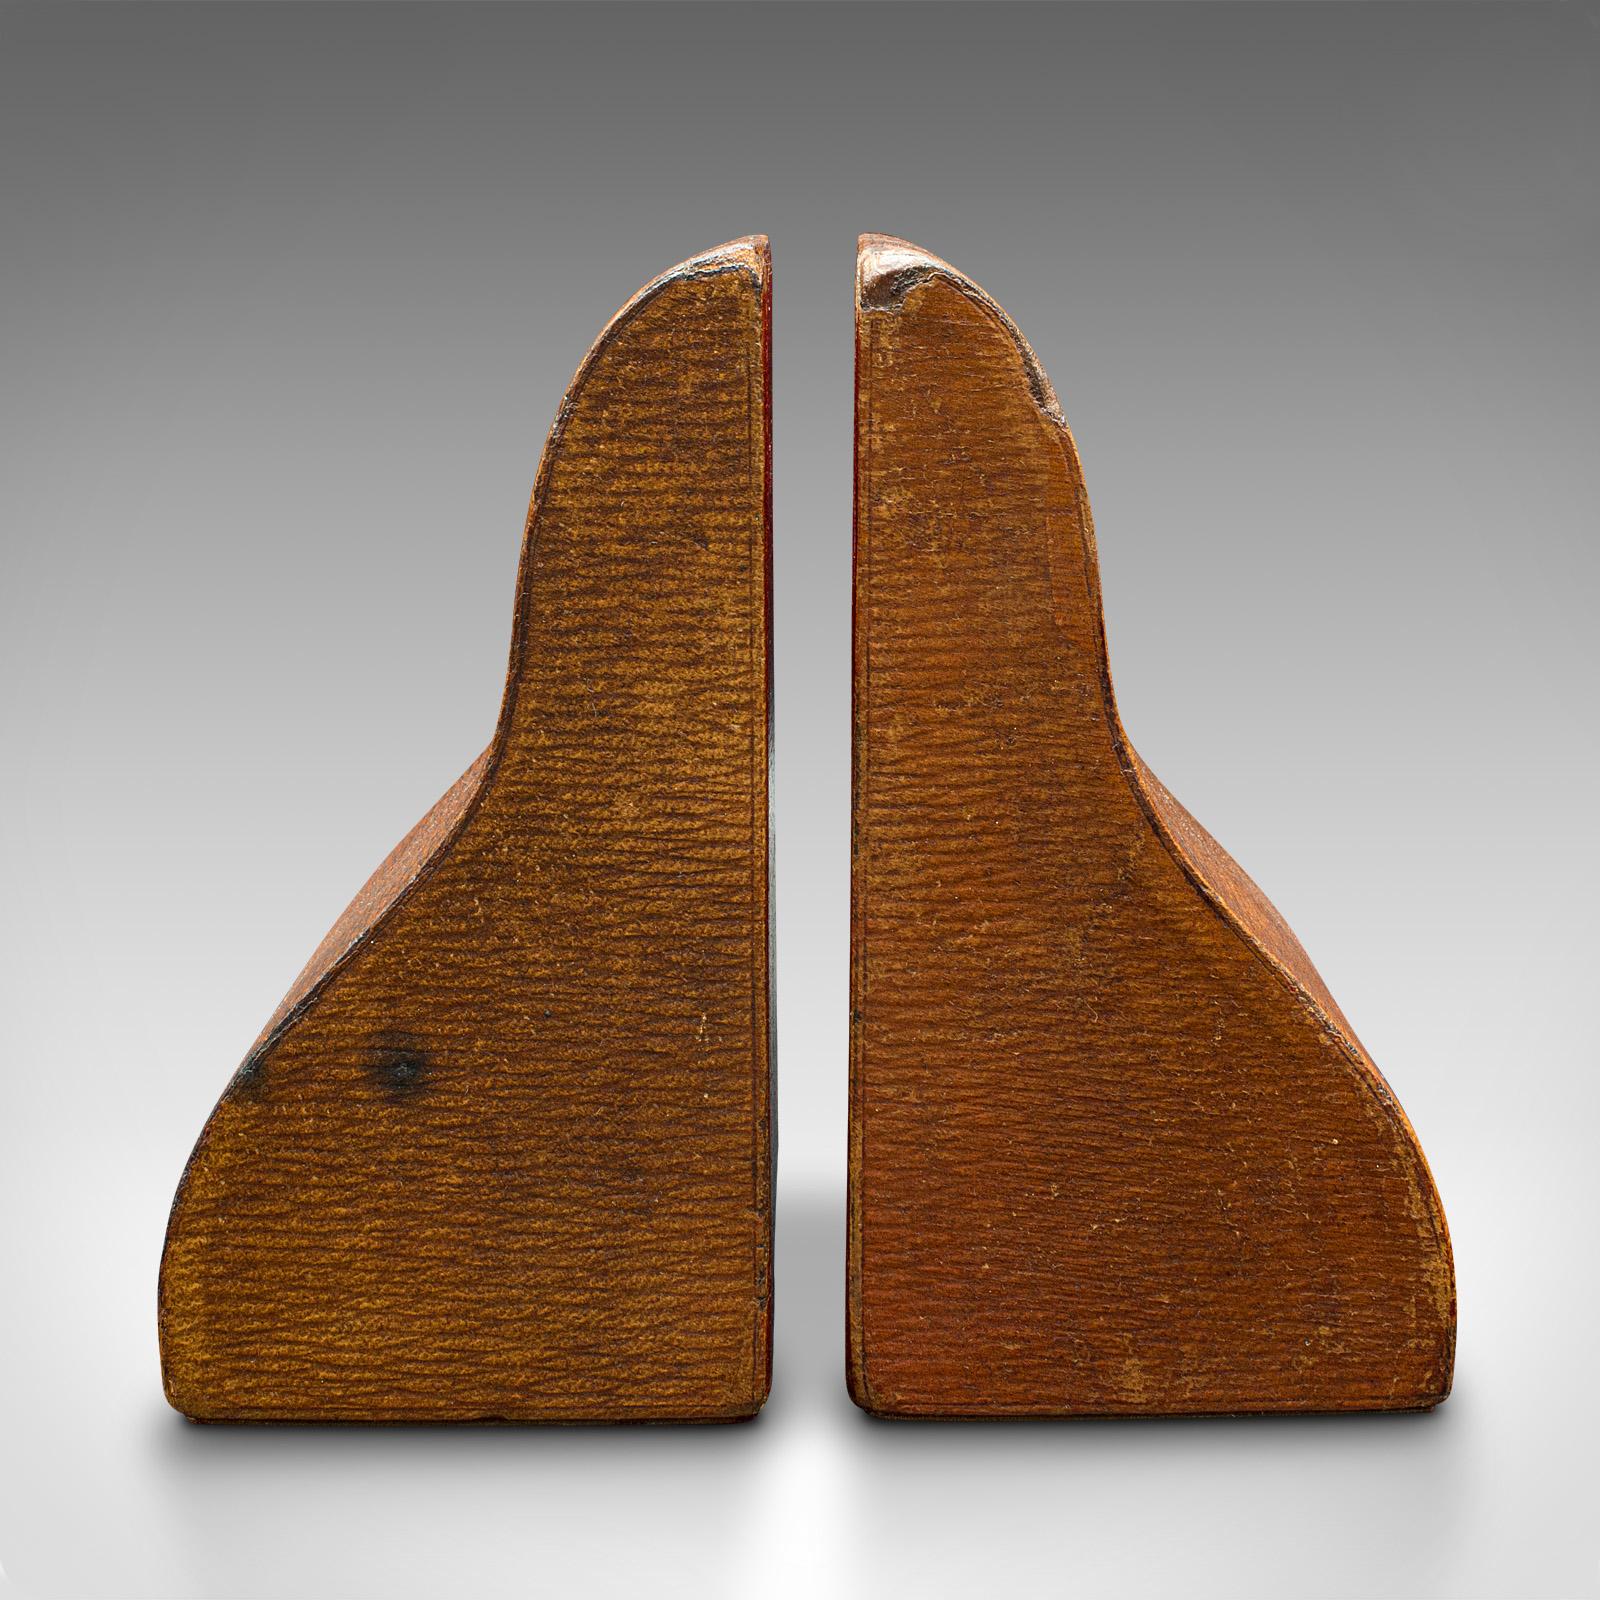 This is a pair of antique decorative bookends. An English, leather dressed book rest, dating to the Edwardian period, circa 1910.

Fascinating colour and tactility to this executive book end
Displays a desirable aged patina and in good order
Quality